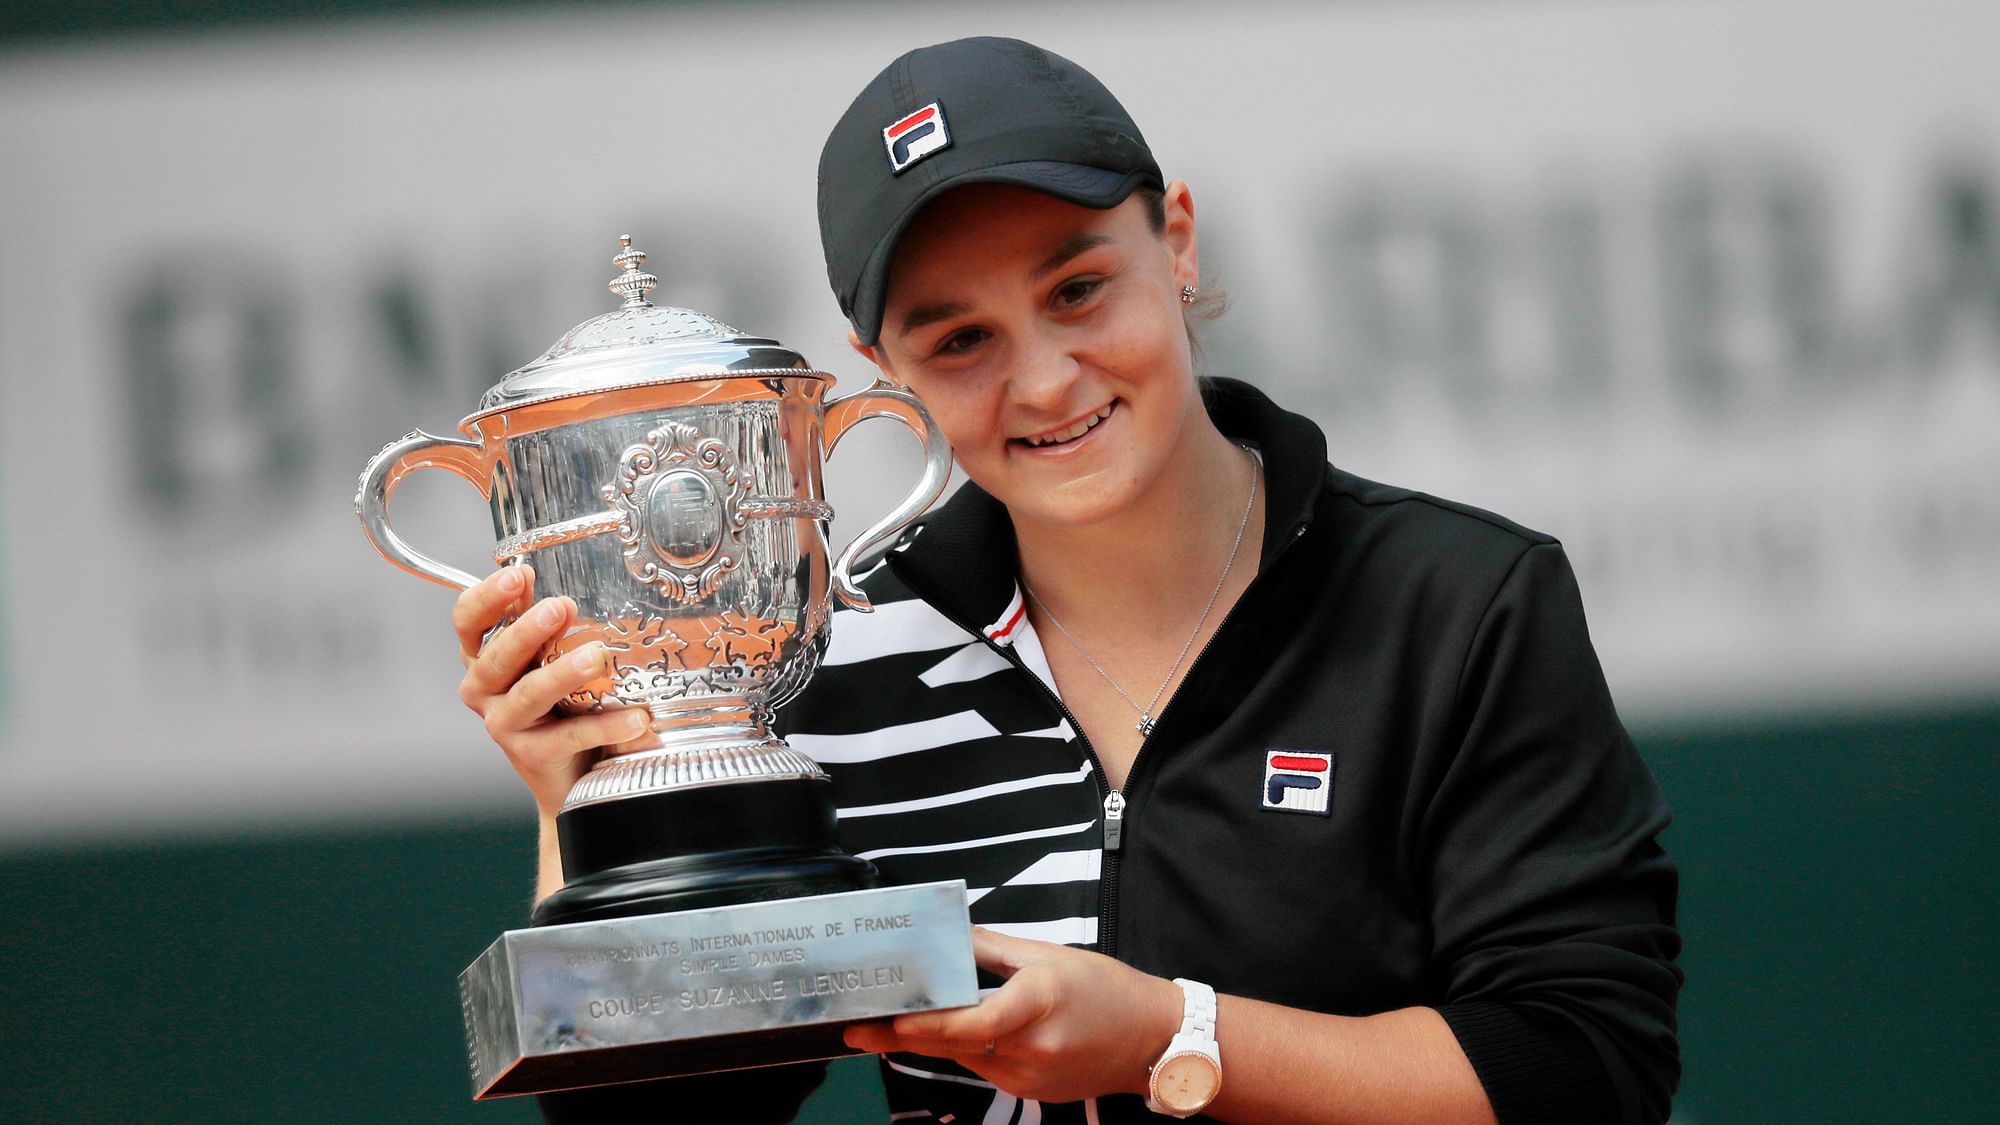 Ash Barty beat unseeded 19-year-old Marketa Vondrousova of the Czech Republic 6-1, 6-3 in the French Open final.